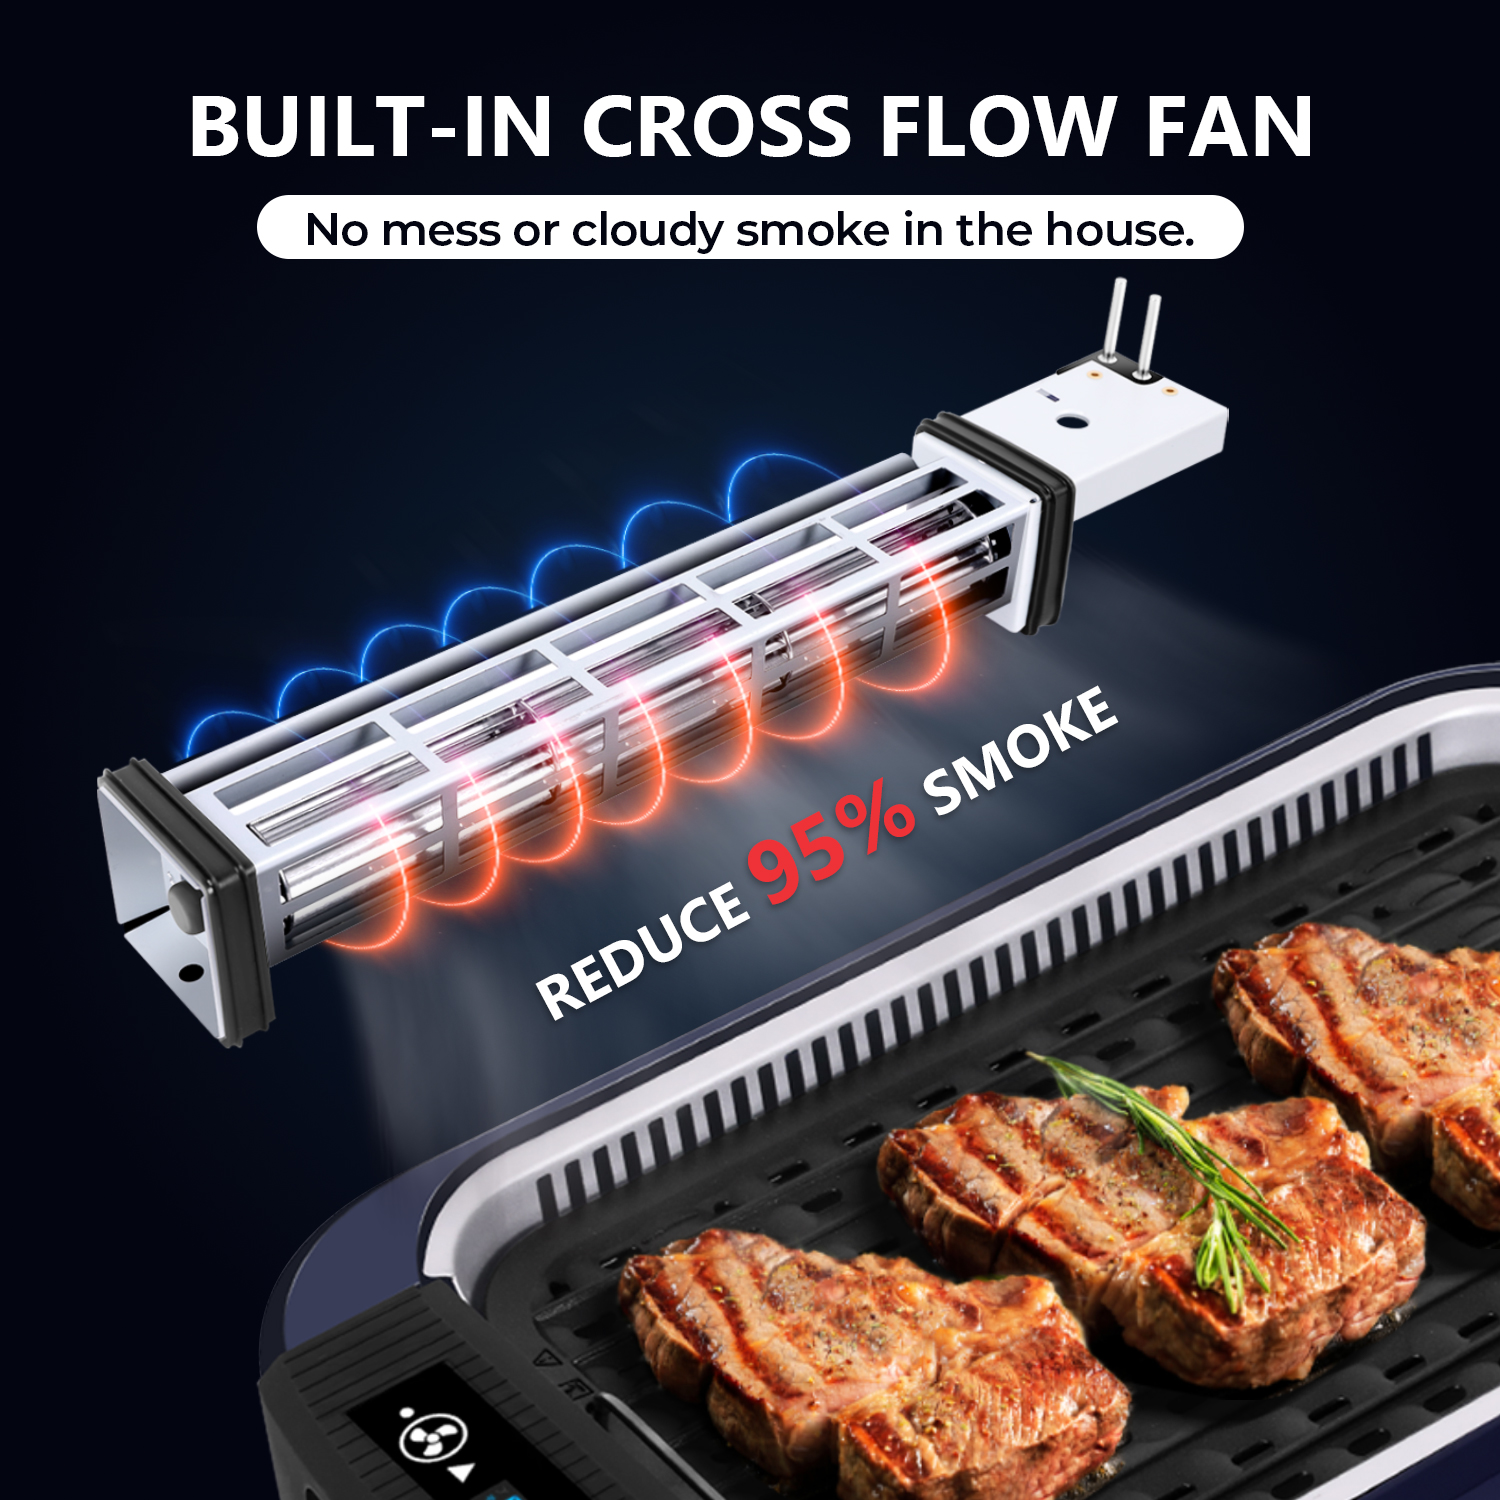 Indoor Grill Electric Grill Griddle Cusimax Smokeless Grill, Portable Korean BBQ Grill with Turbo Smoke Extractor Technology, Non-Stick Removable